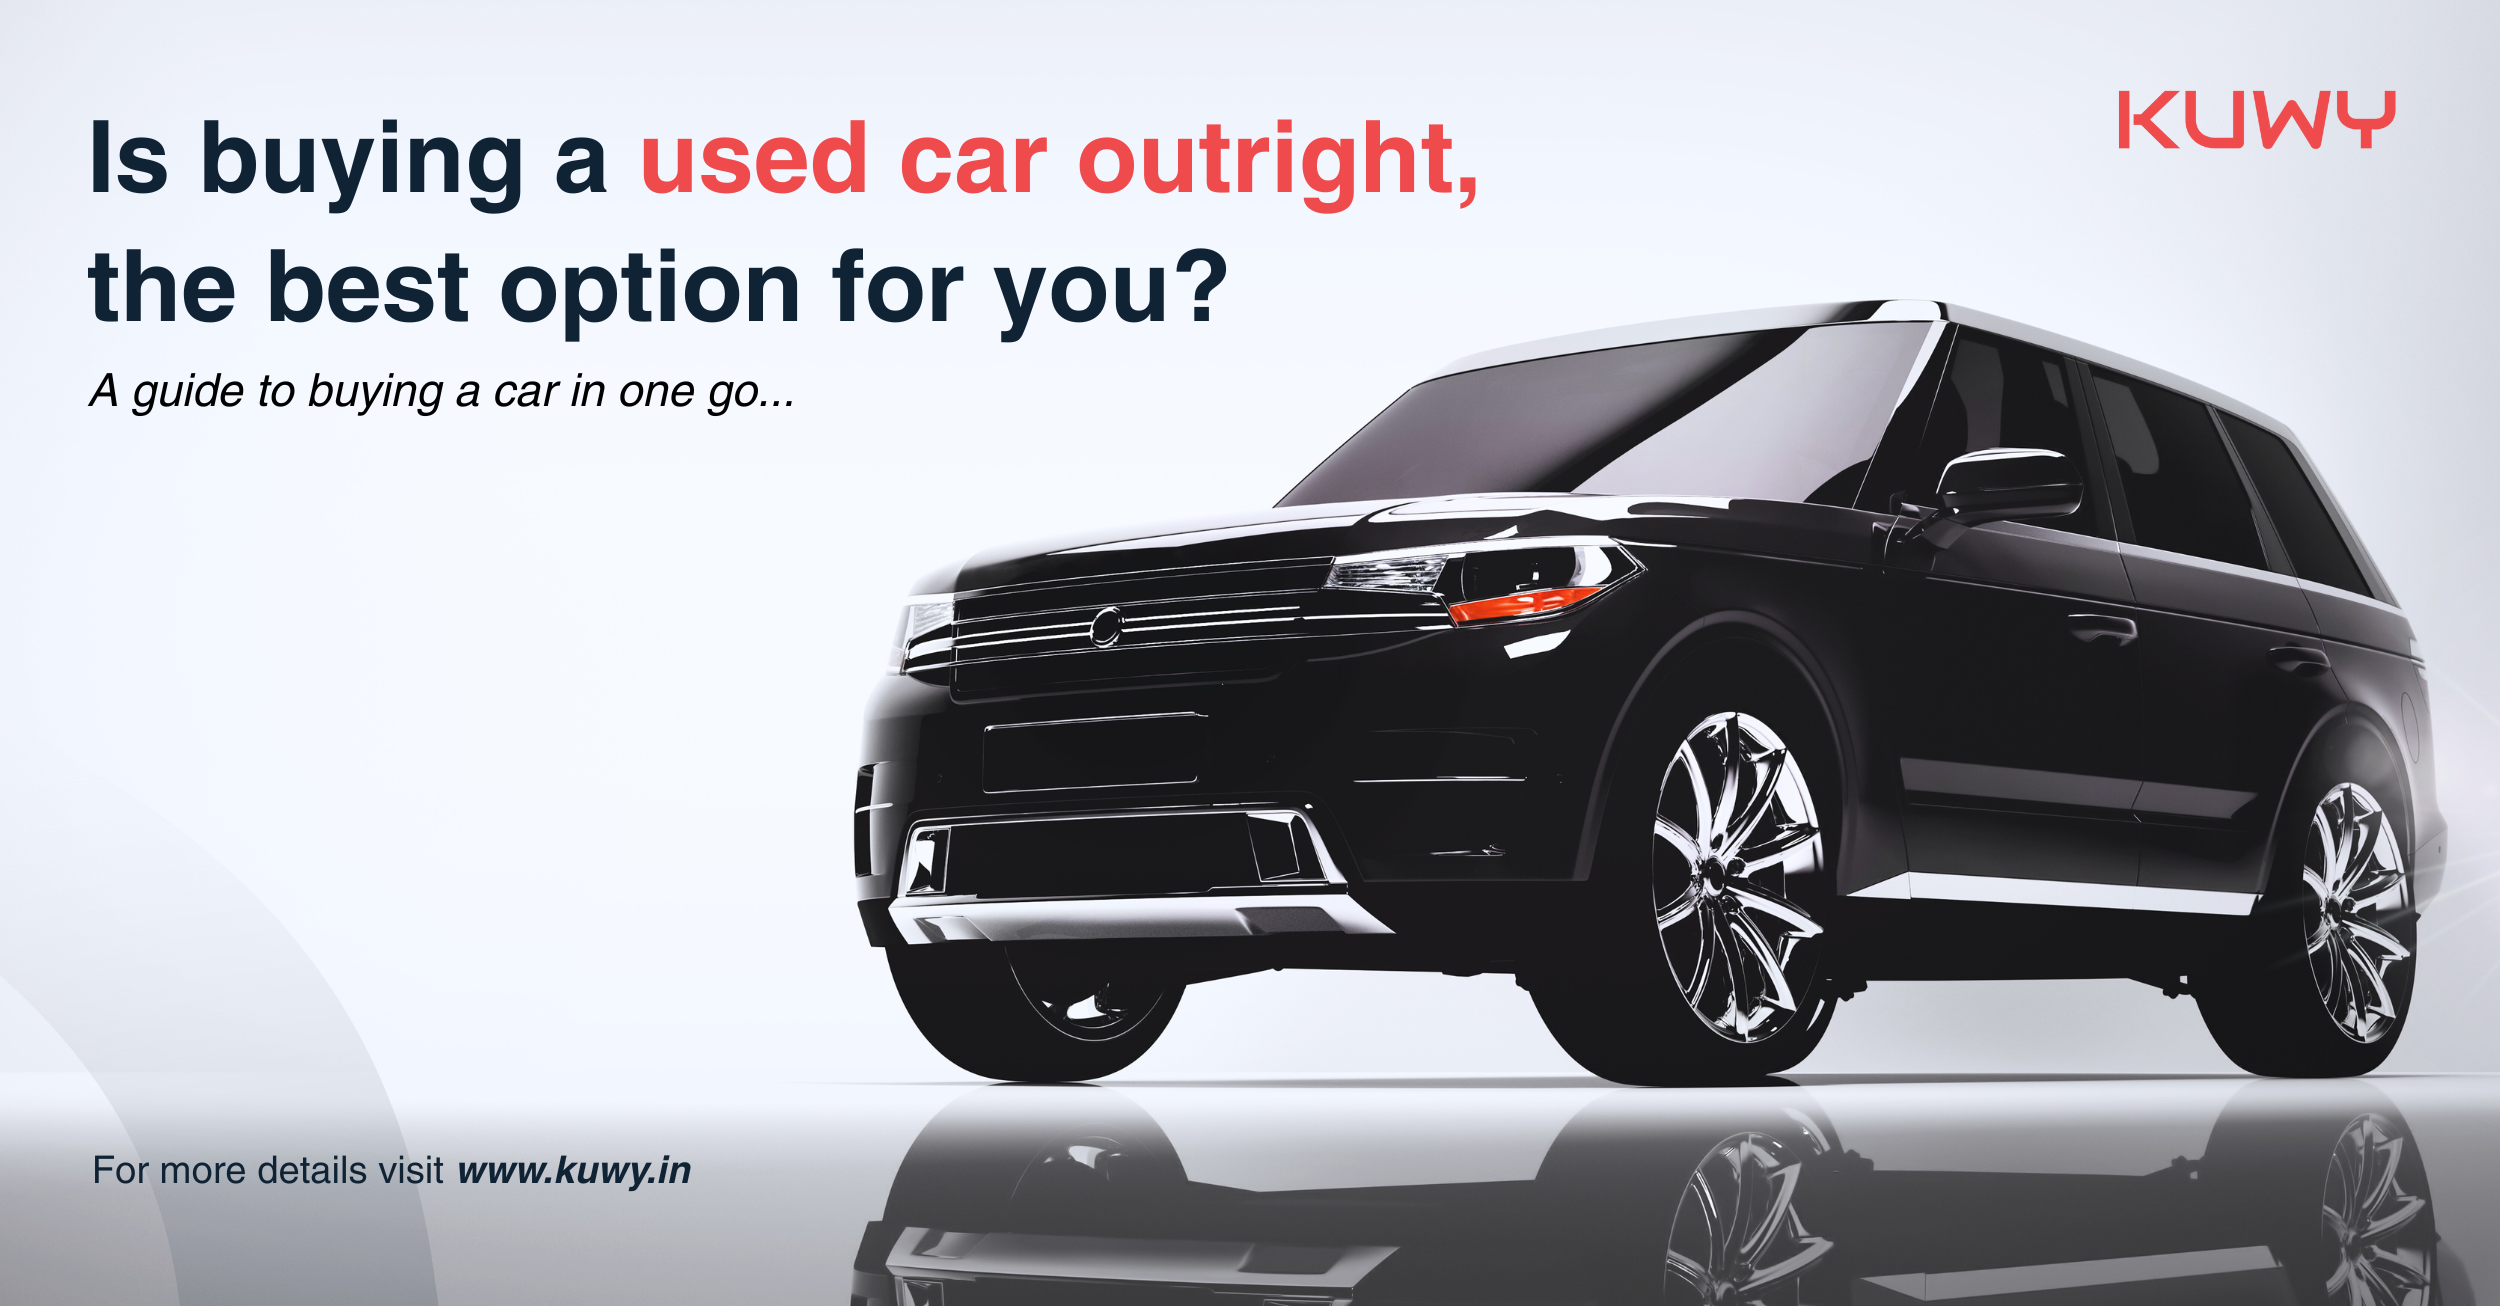 Is buying your used car outright the best option for you?